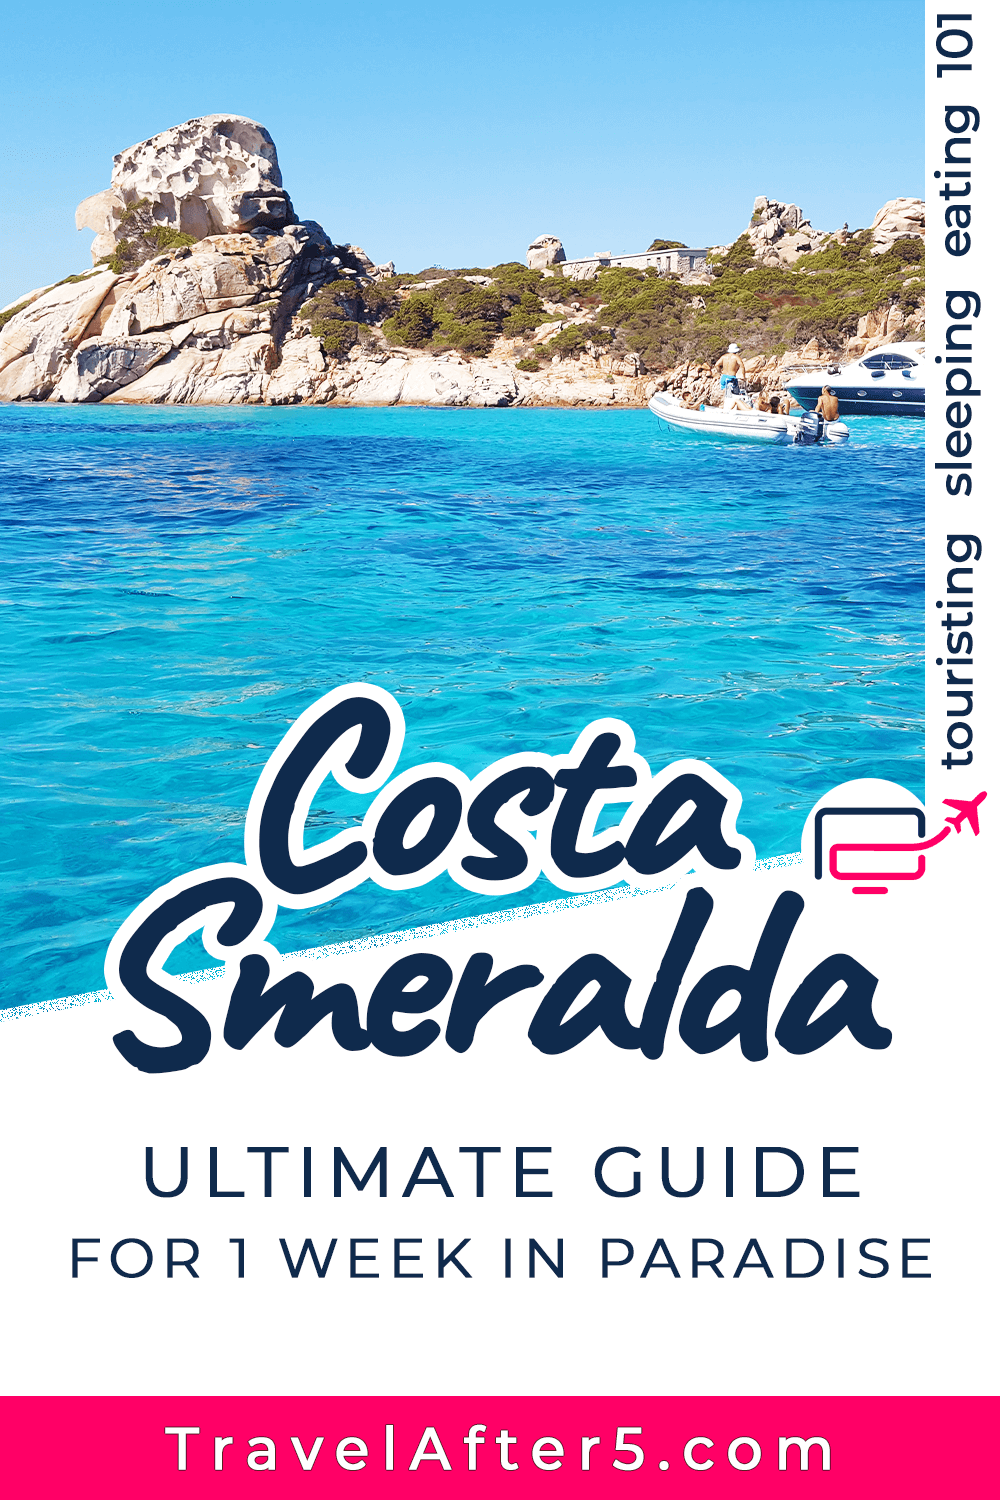 Pinterest Pin_Costa Smeralda: Ultimate Guide for 1 Week in Paradise, by Travel After 5